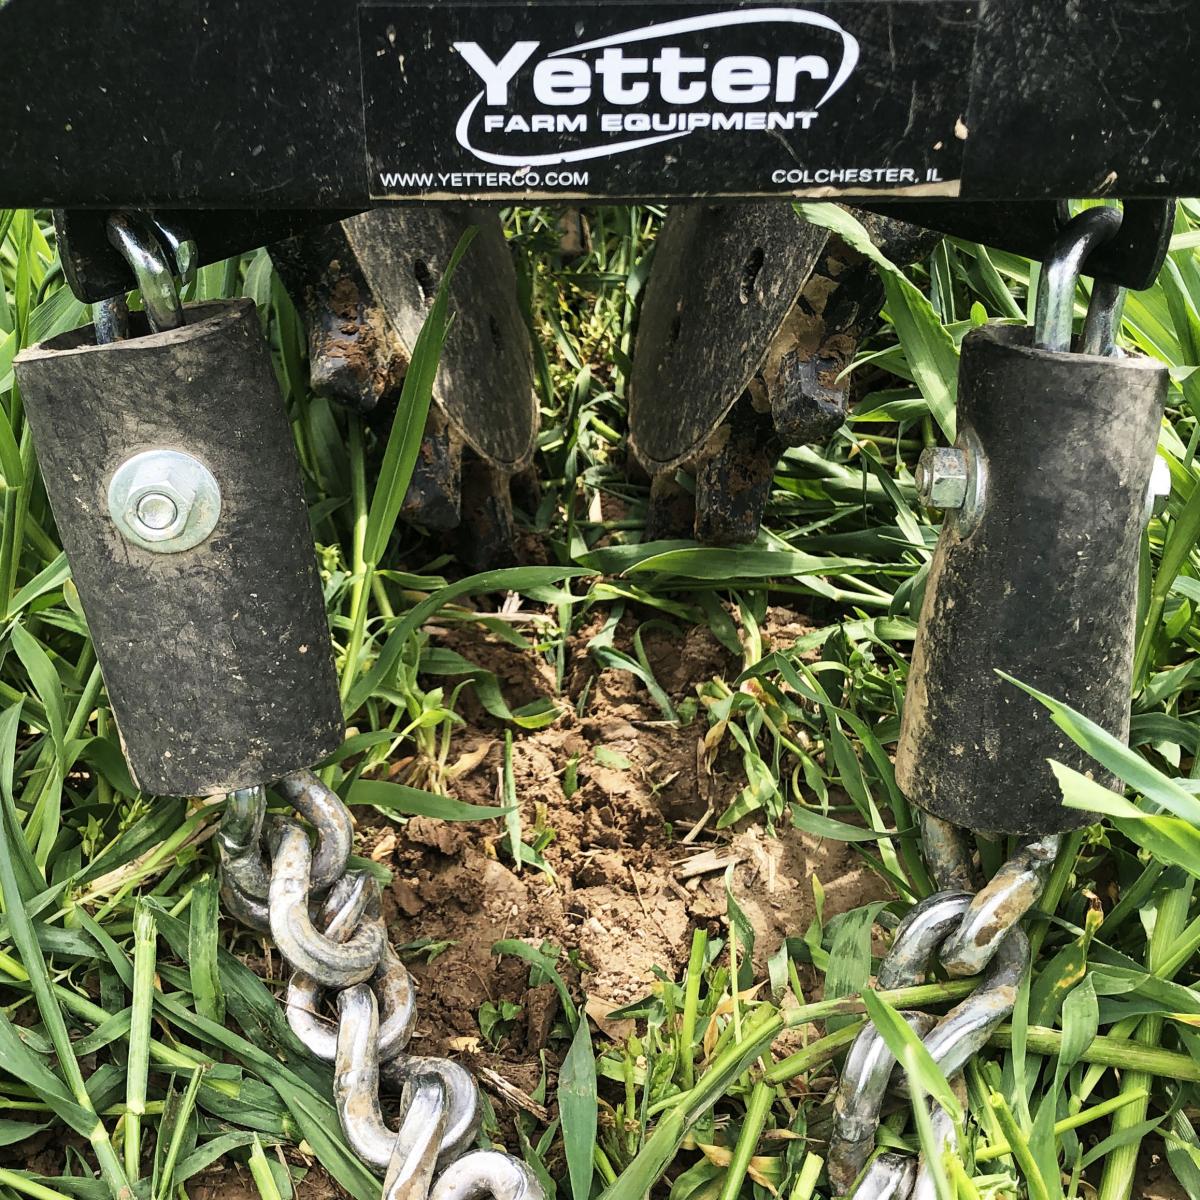 Twister closing seed furrow in cover crops with drag chain.